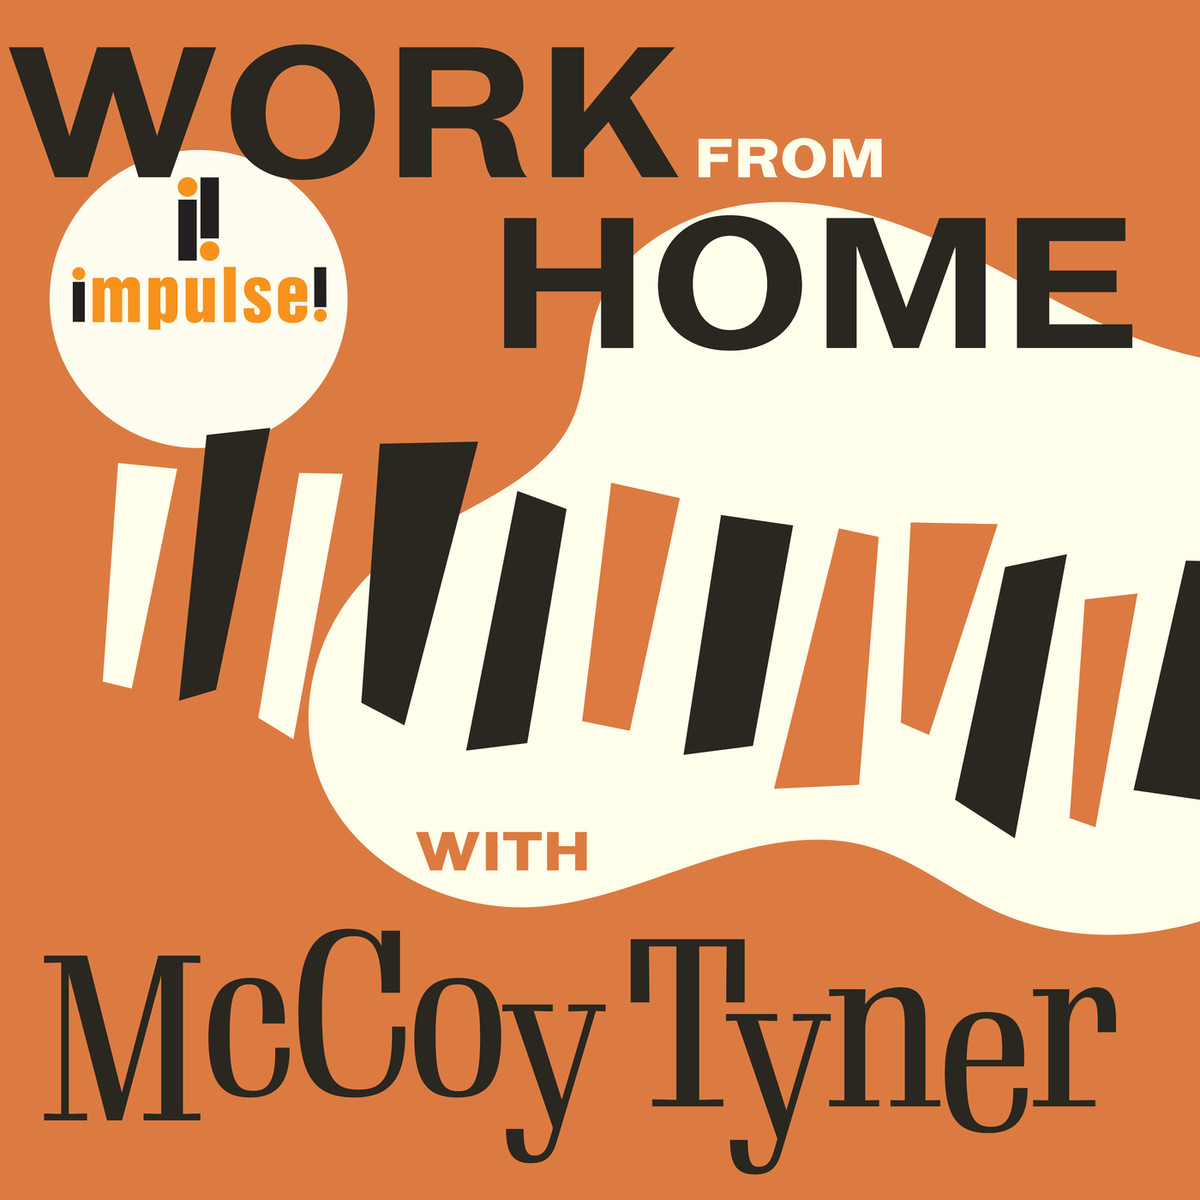 work from home song download mp3